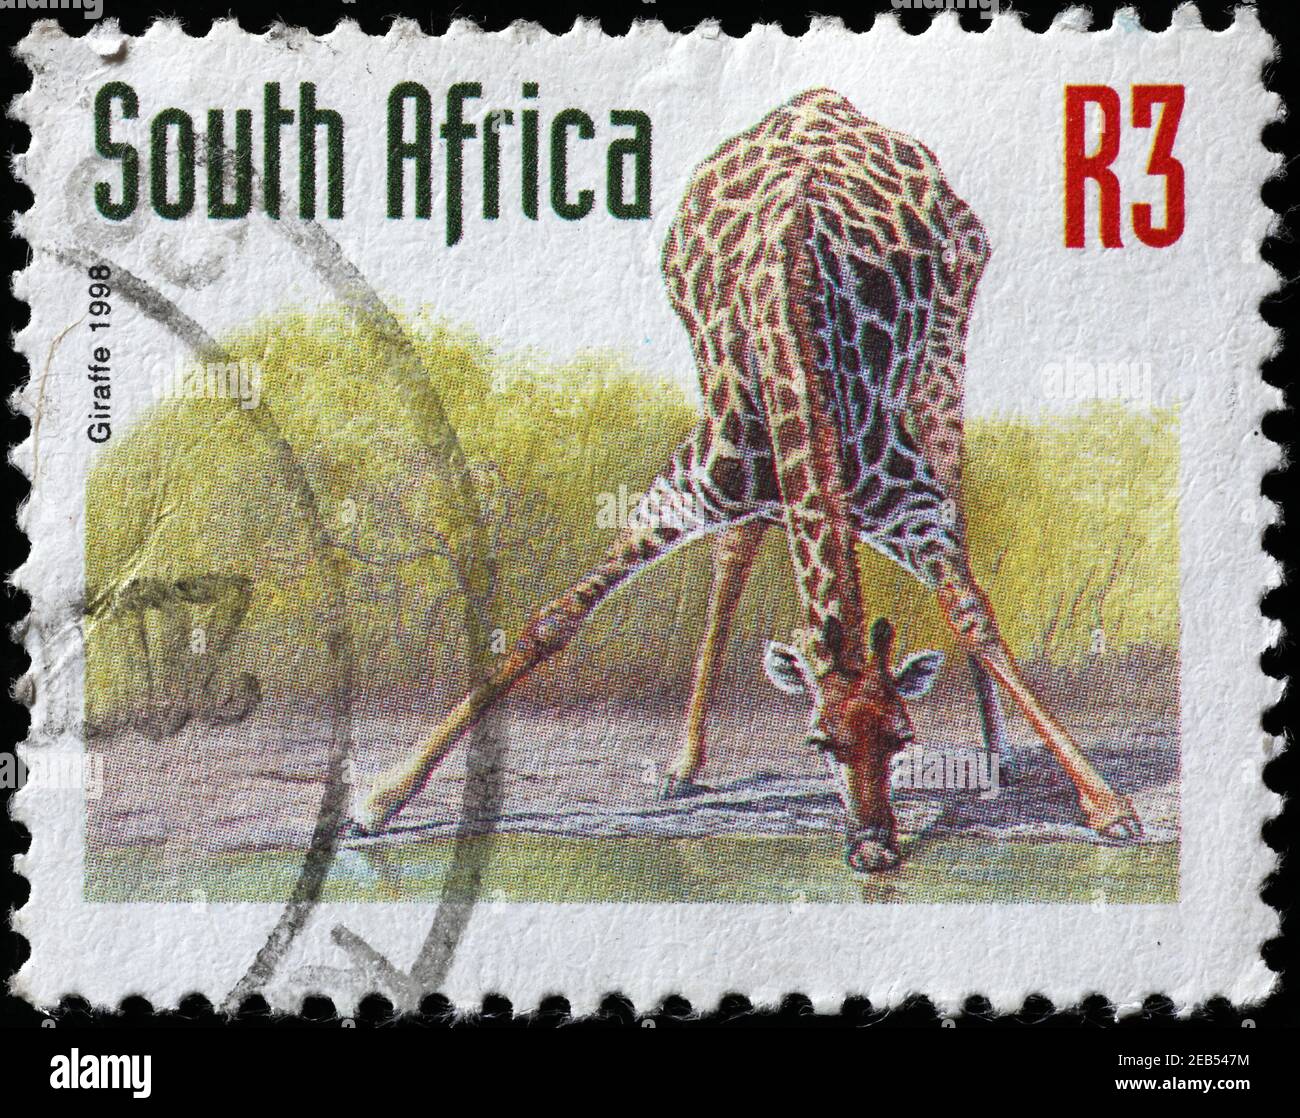 Giraffe drinking on south african postage stamp Stock Photo